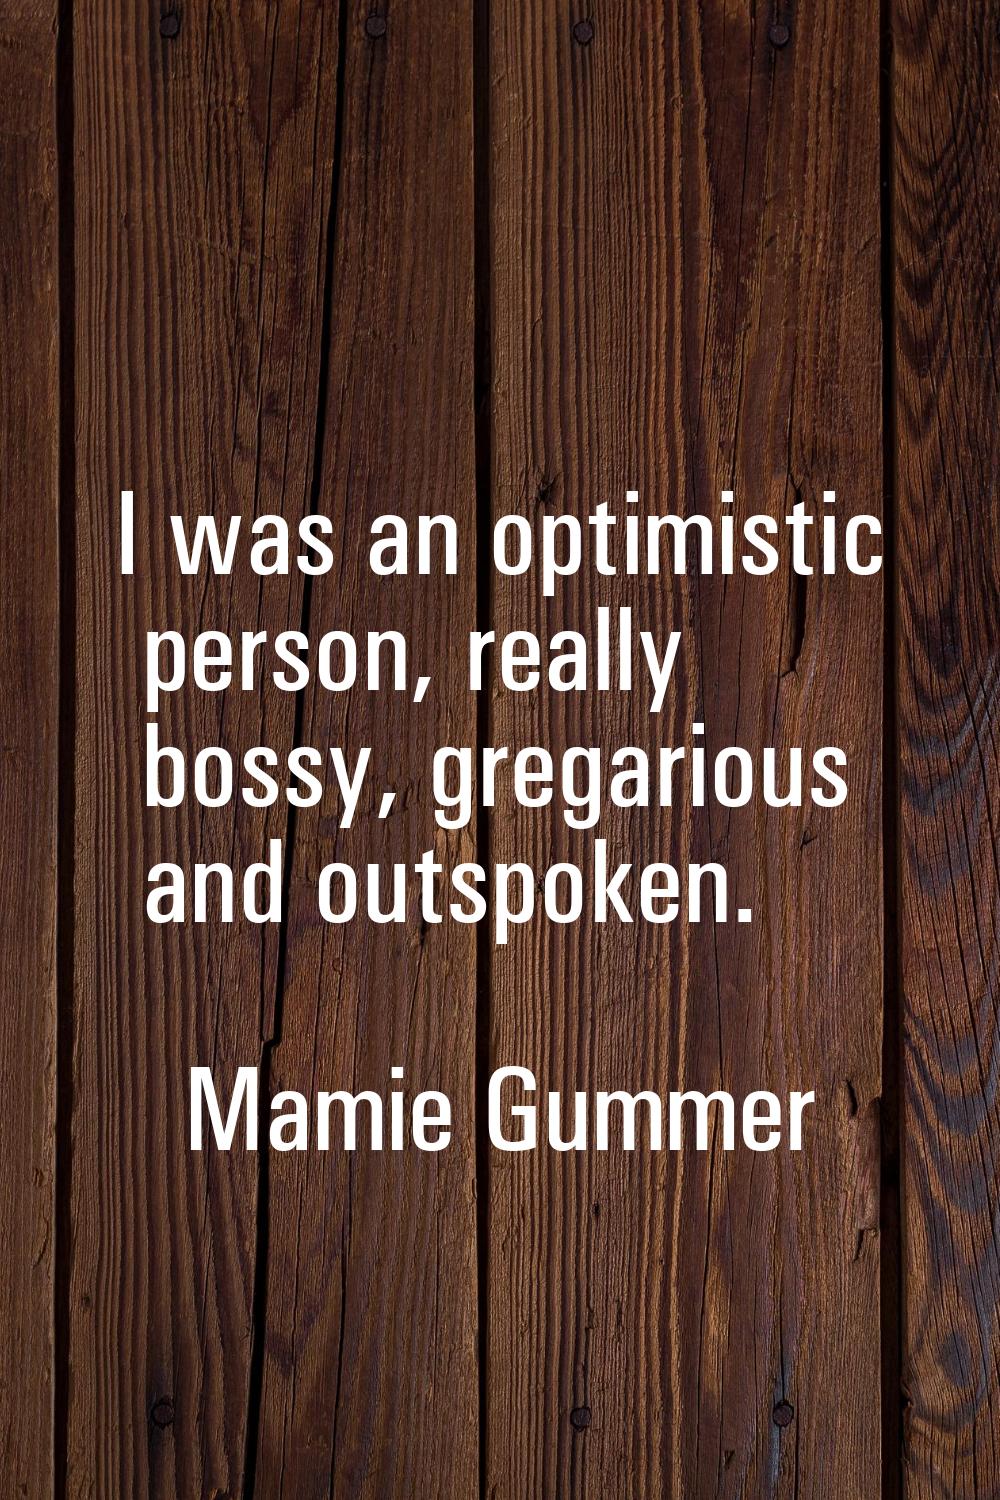 I was an optimistic person, really bossy, gregarious and outspoken.